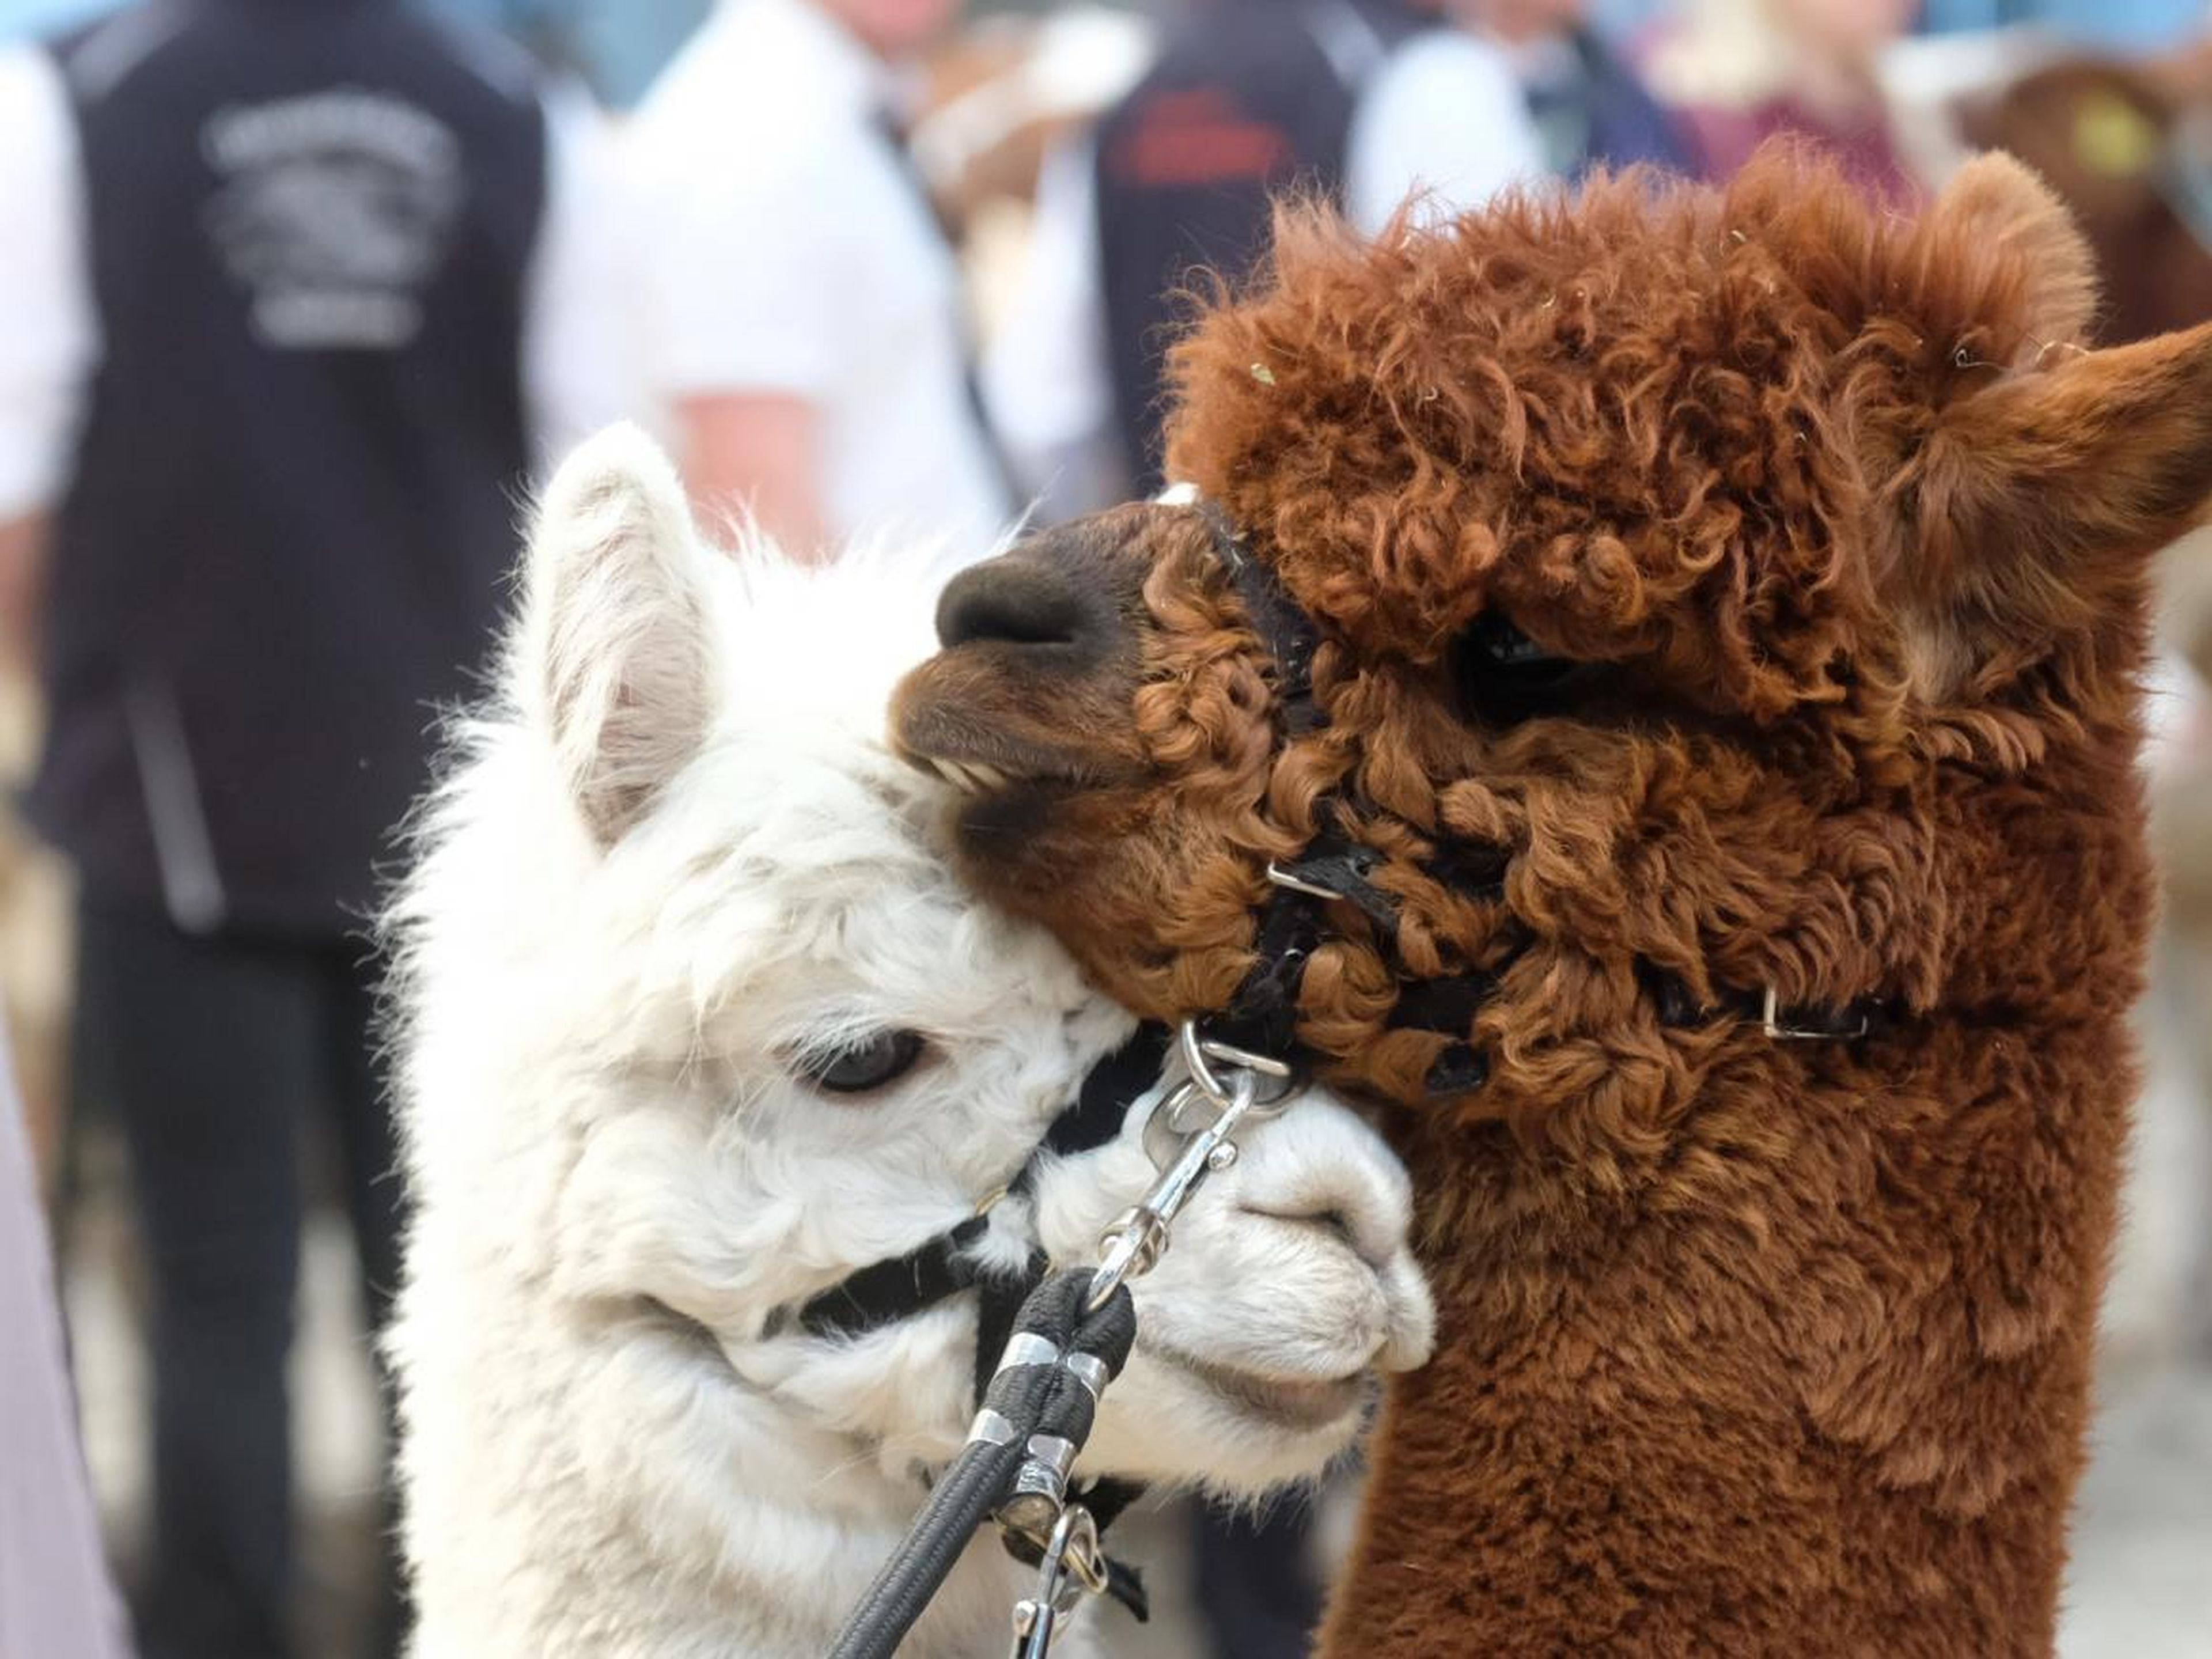 There were two species of alpacas at the parade (not pictured): Huacaya and Suri, according to Guinness World Records.